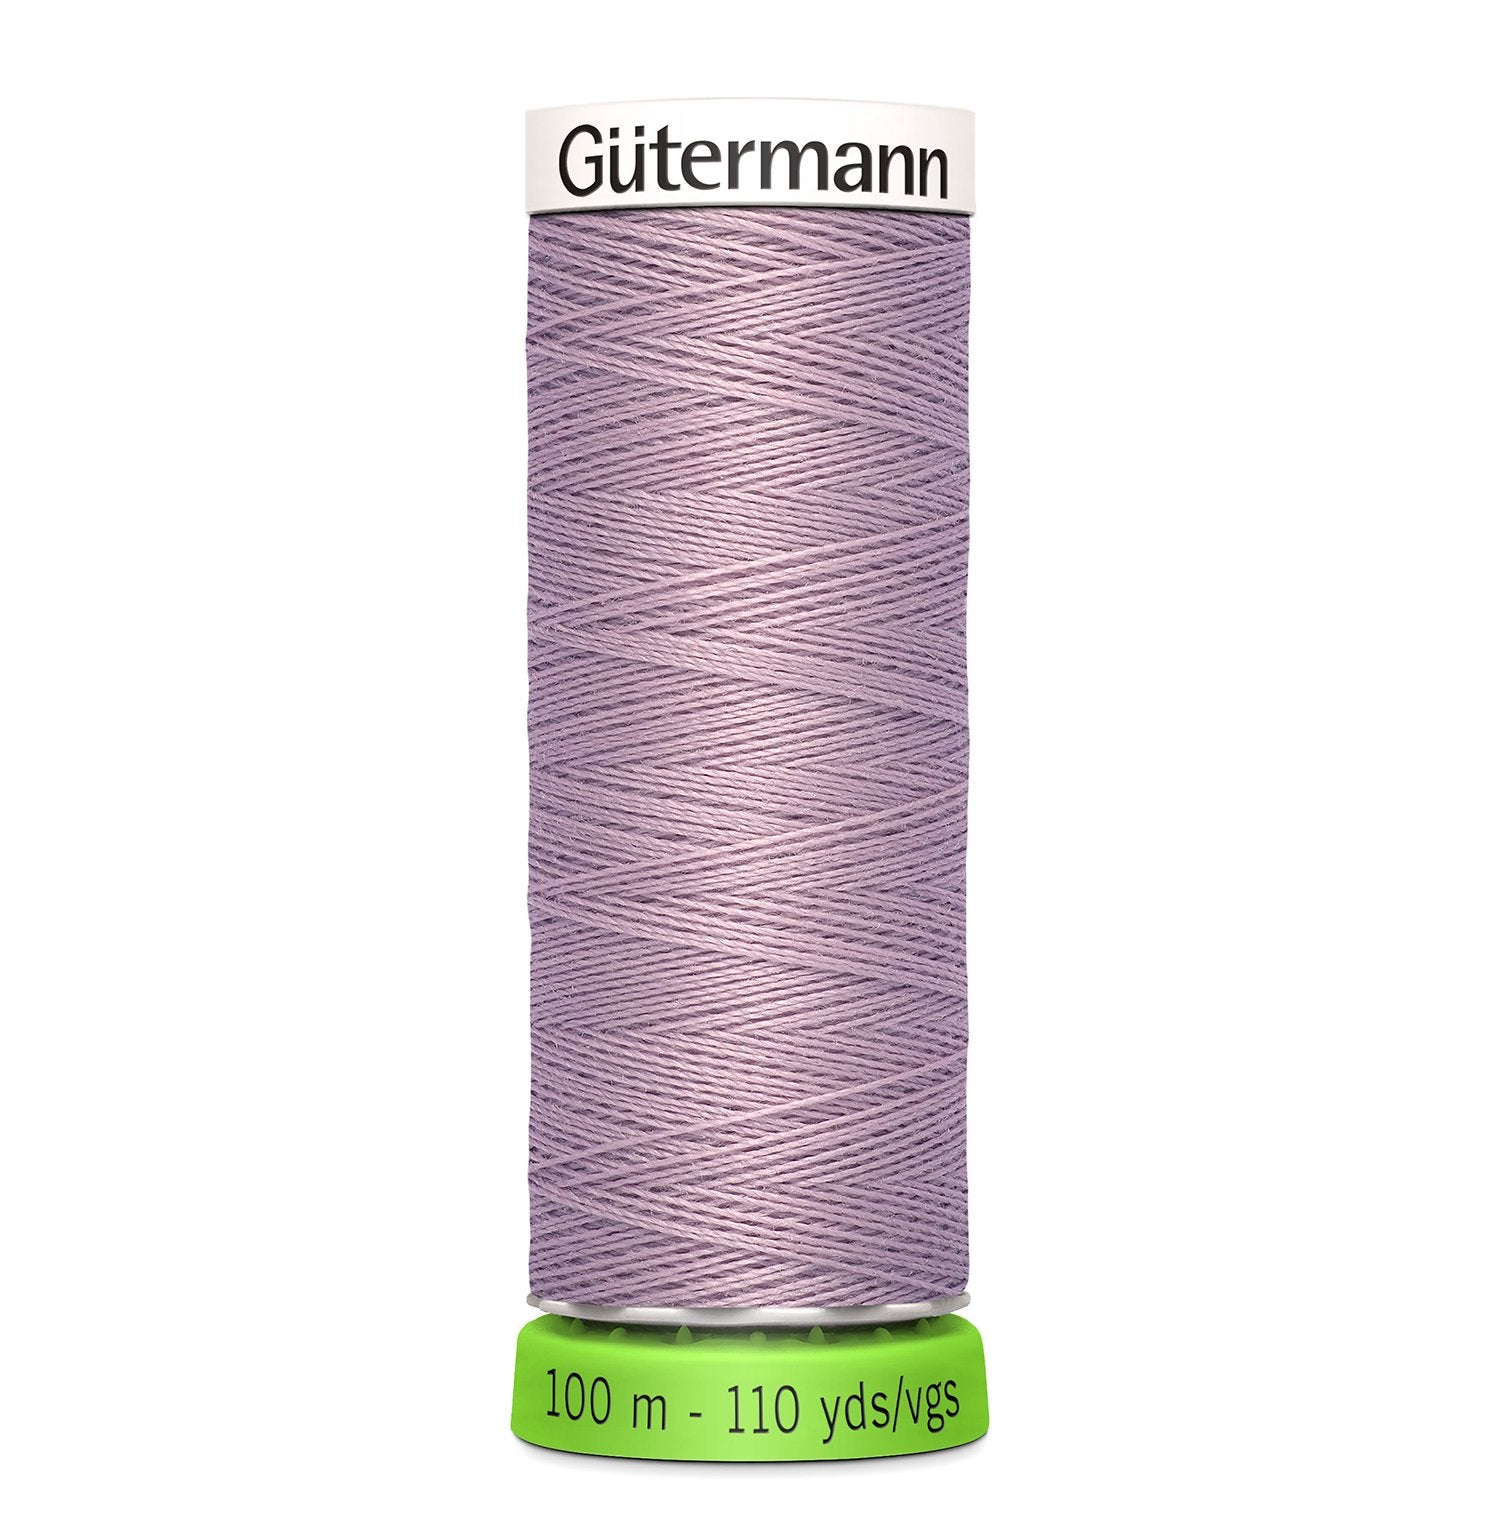 Gutermann Recycled Thread 100m, Colour 568 from Jaycotts Sewing Supplies